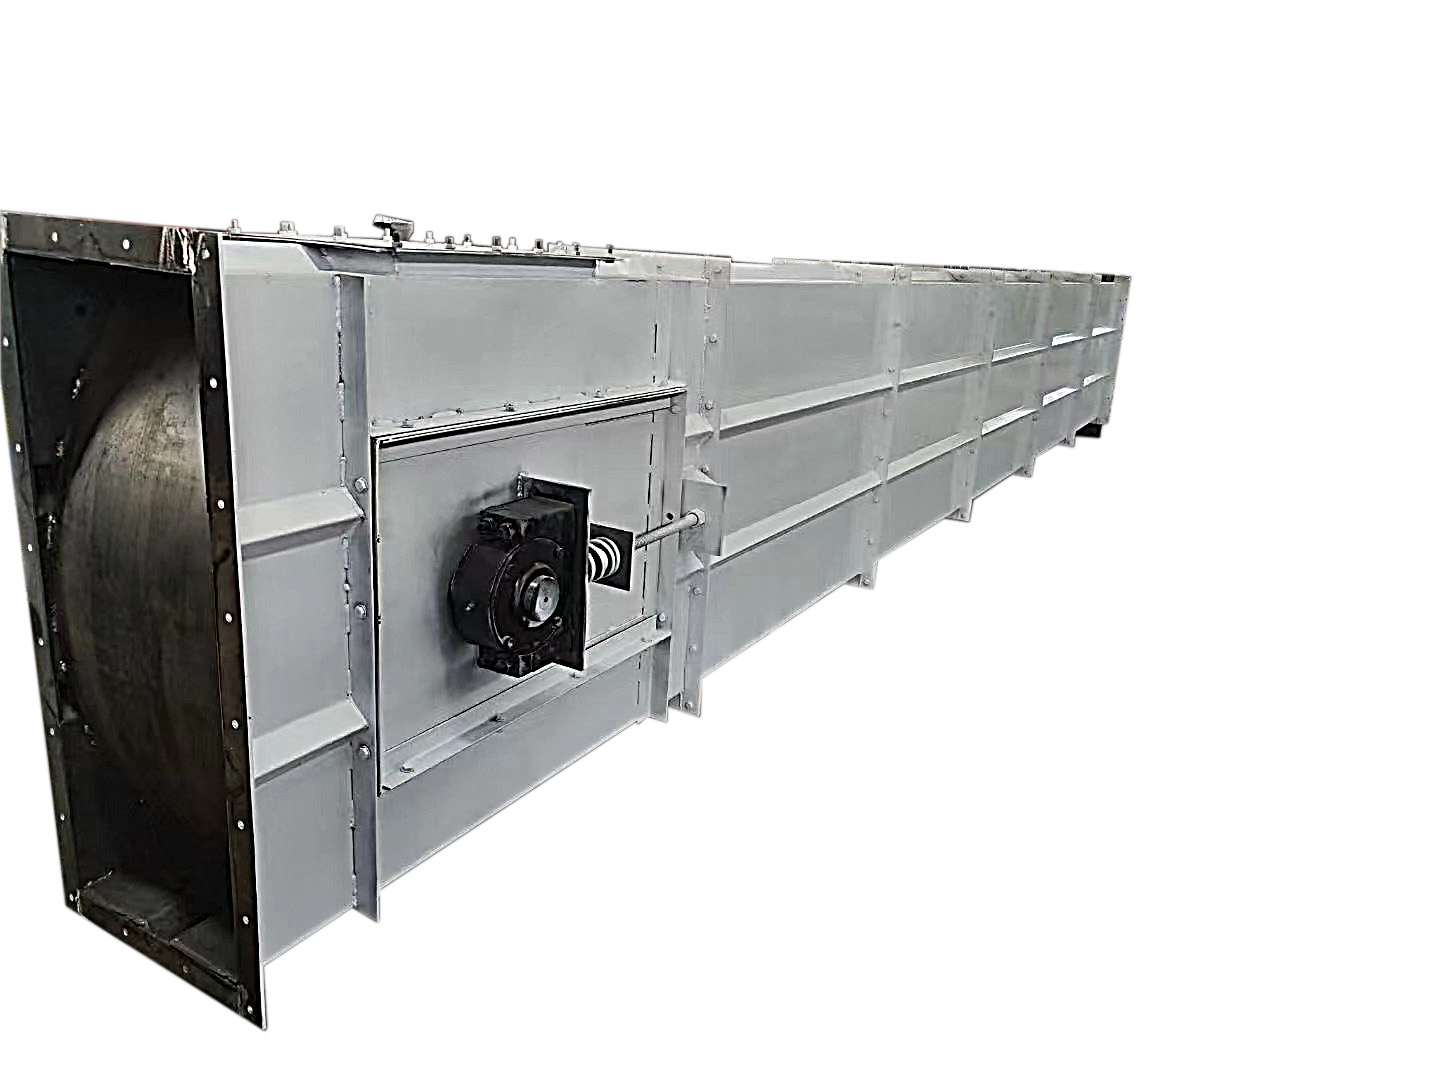 High-quality mine hoists are available for purchase